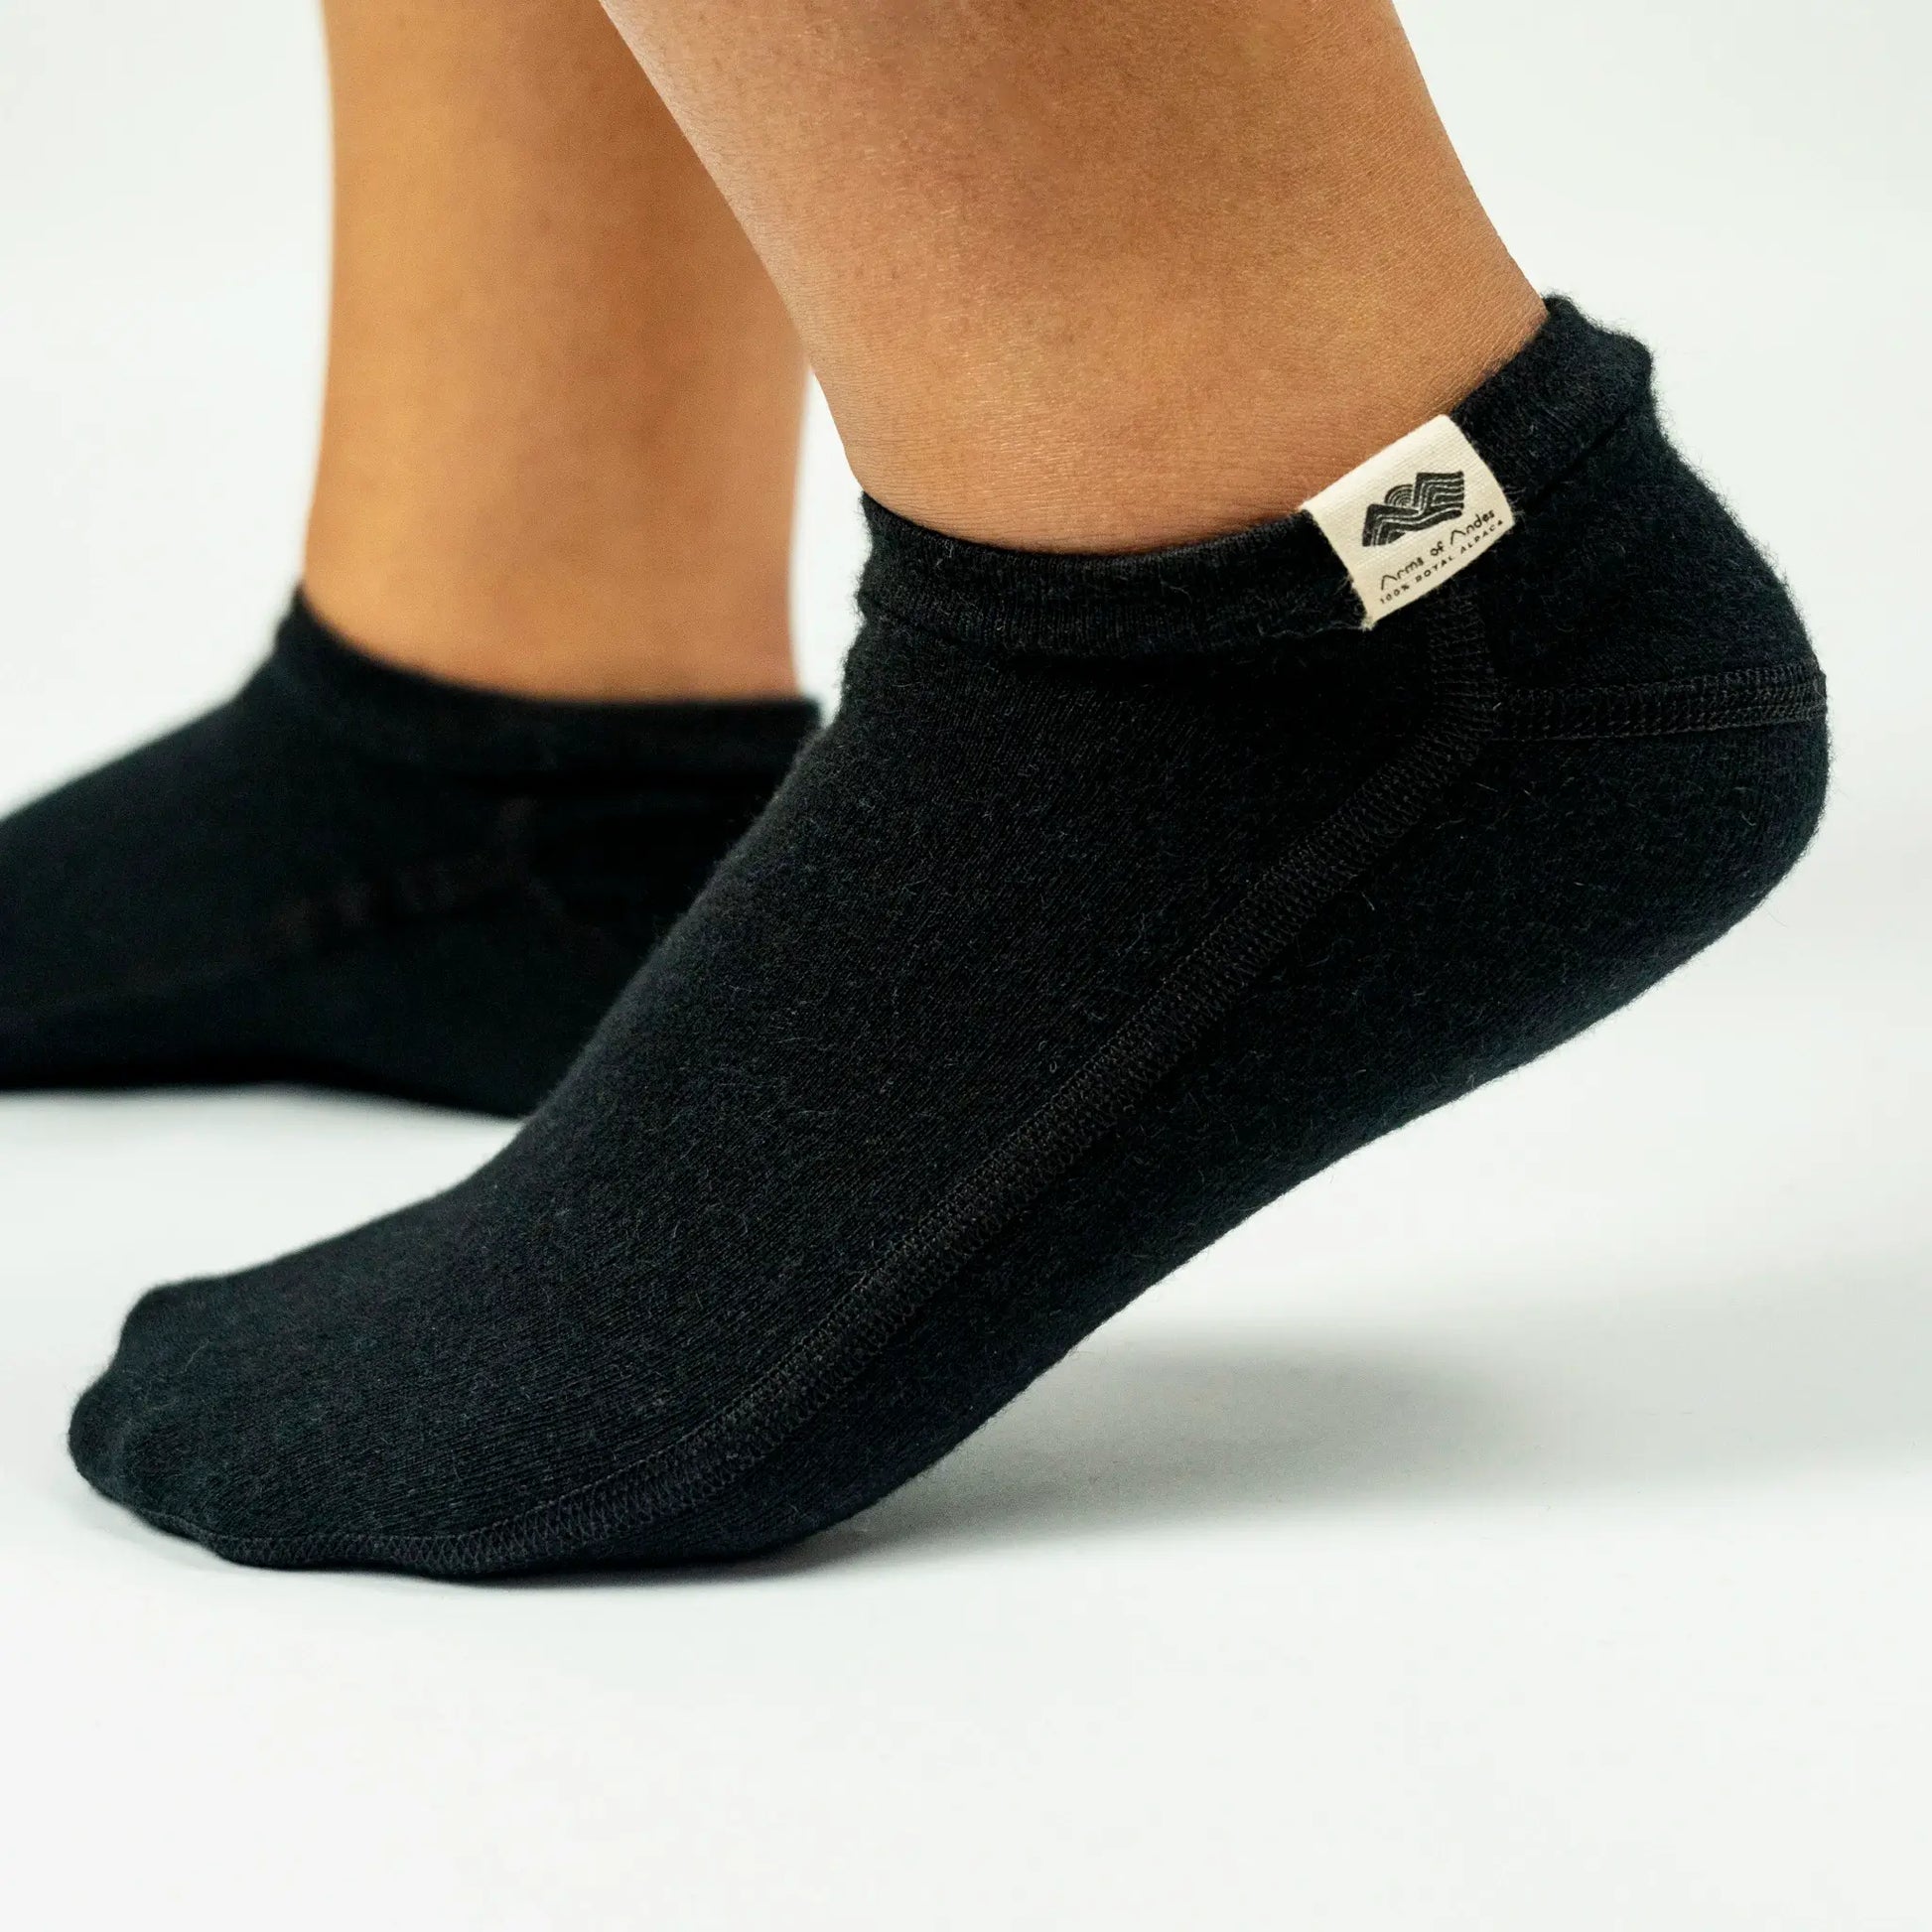 Eco Friendly socks with breathable sole, night blue, Men's Socks